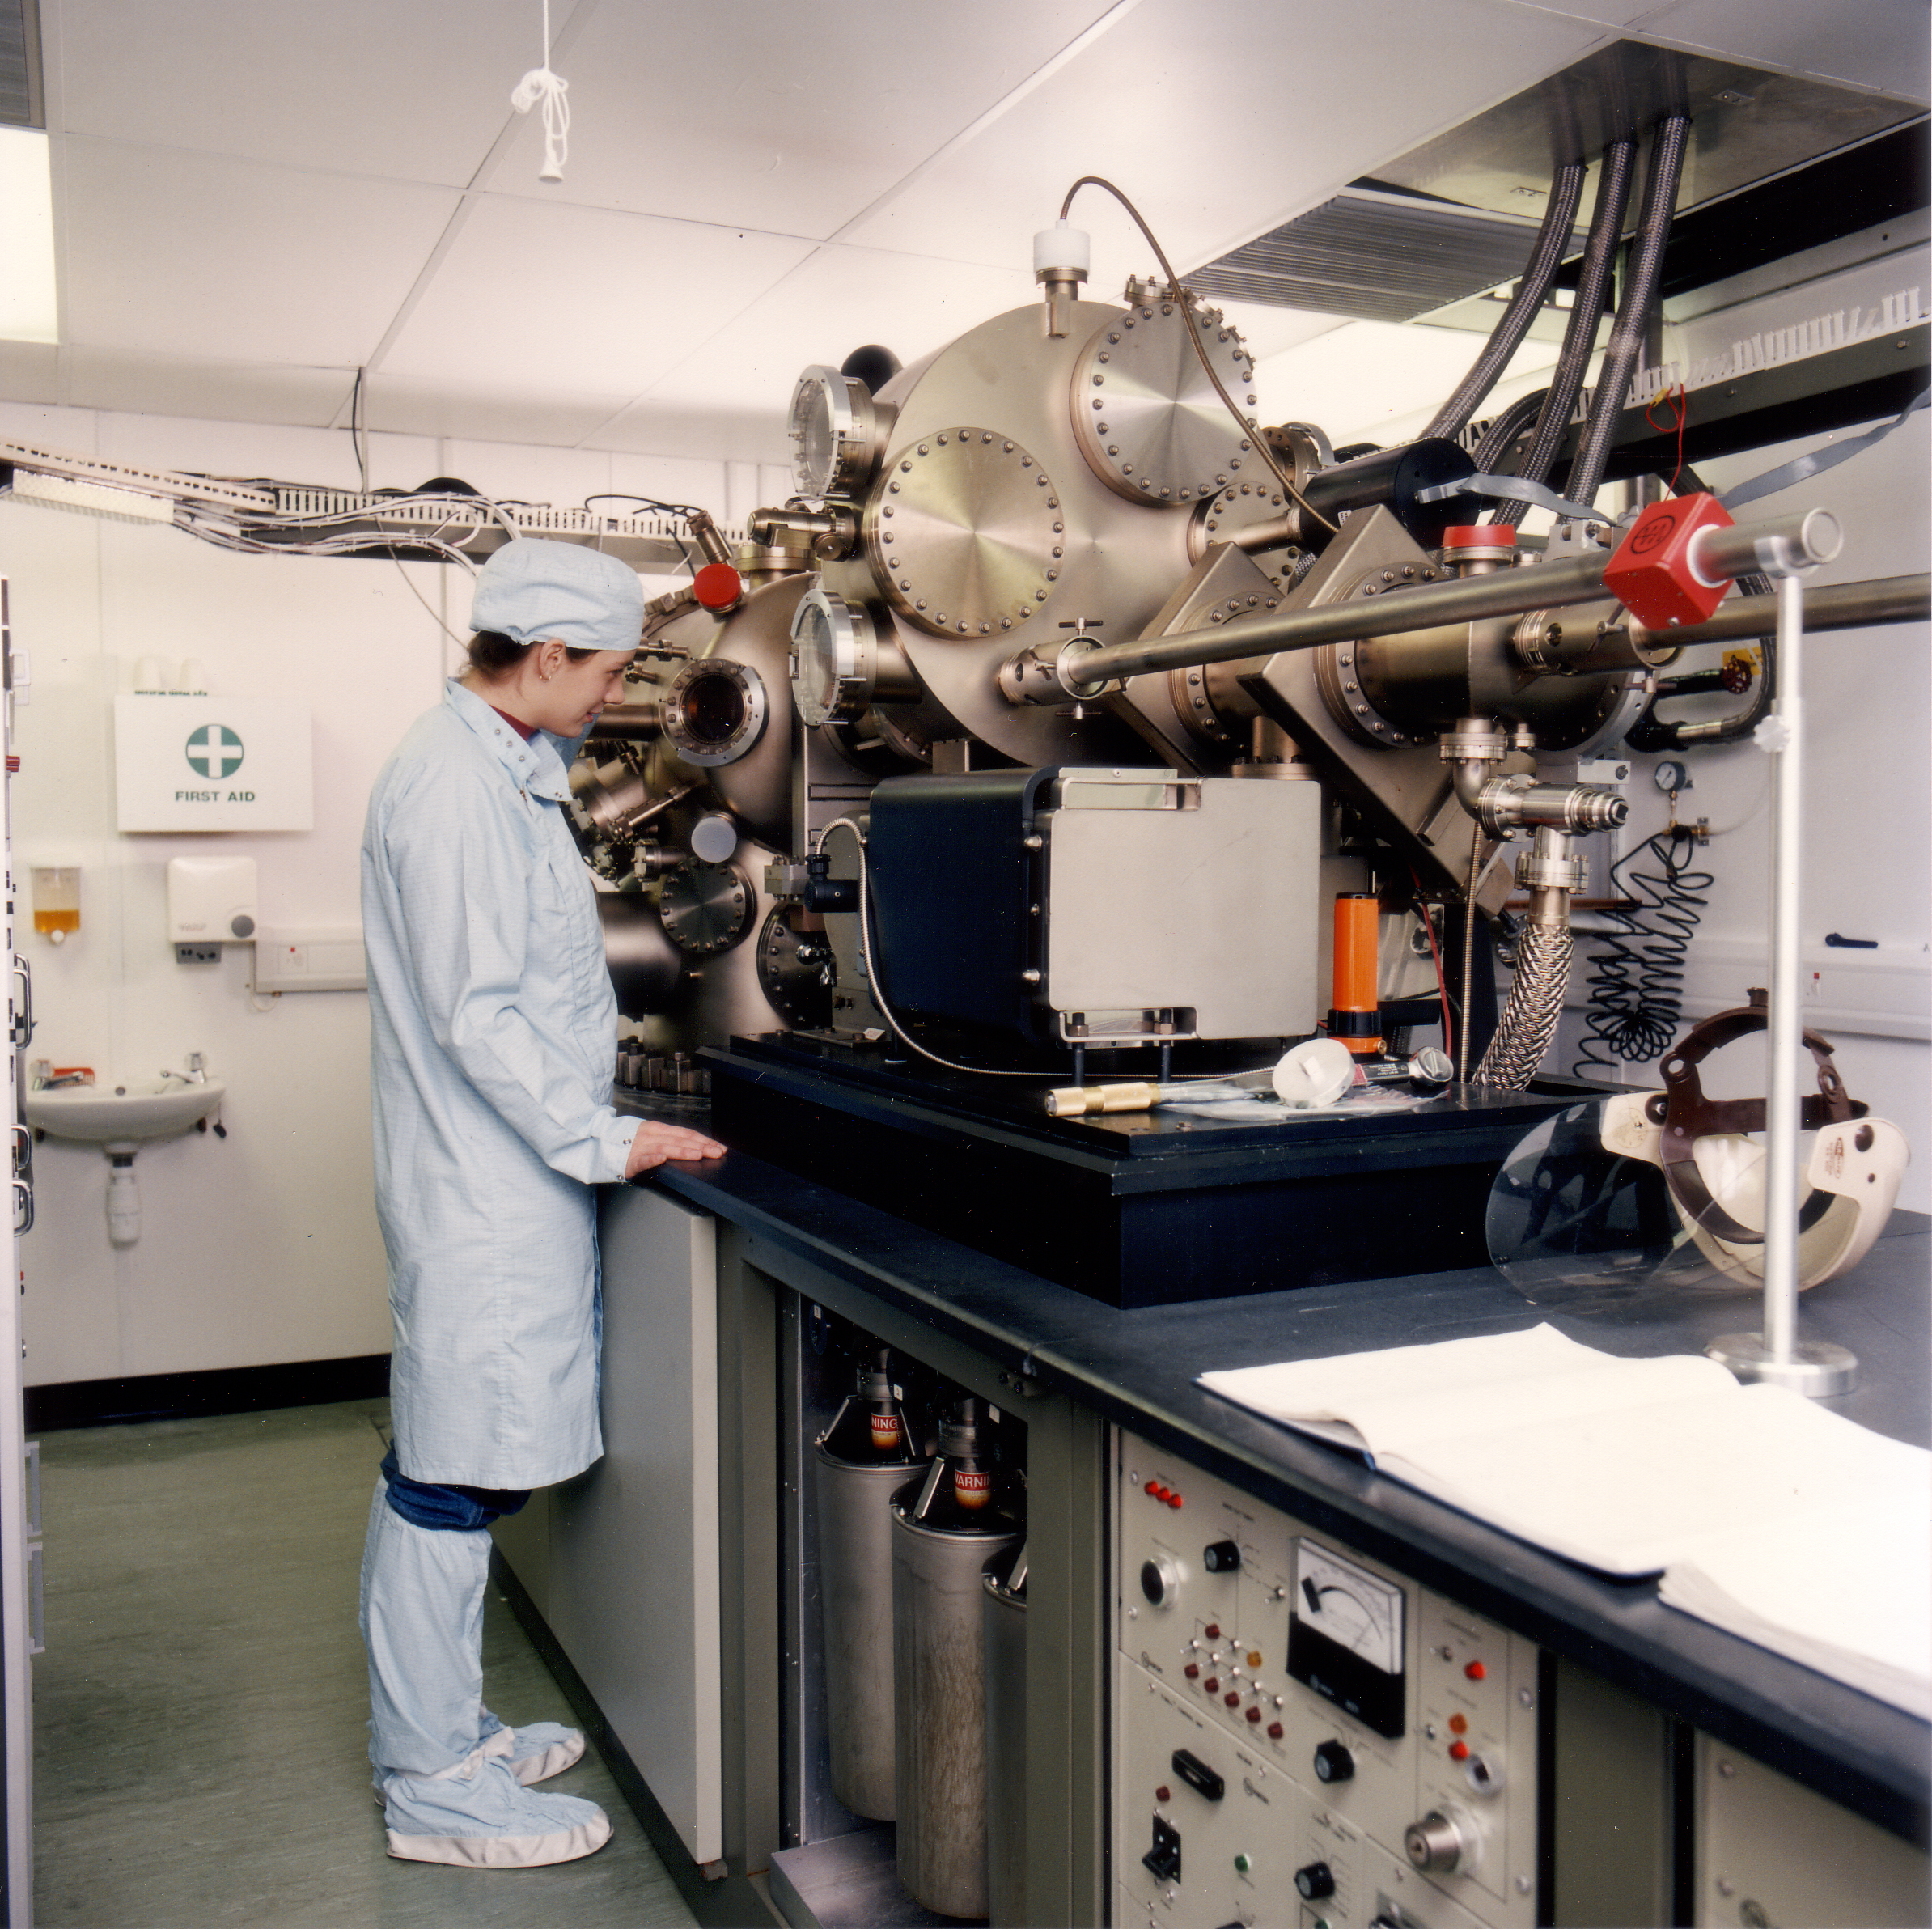 A young woman with short brown hair focuses on complex machinery in a lab.